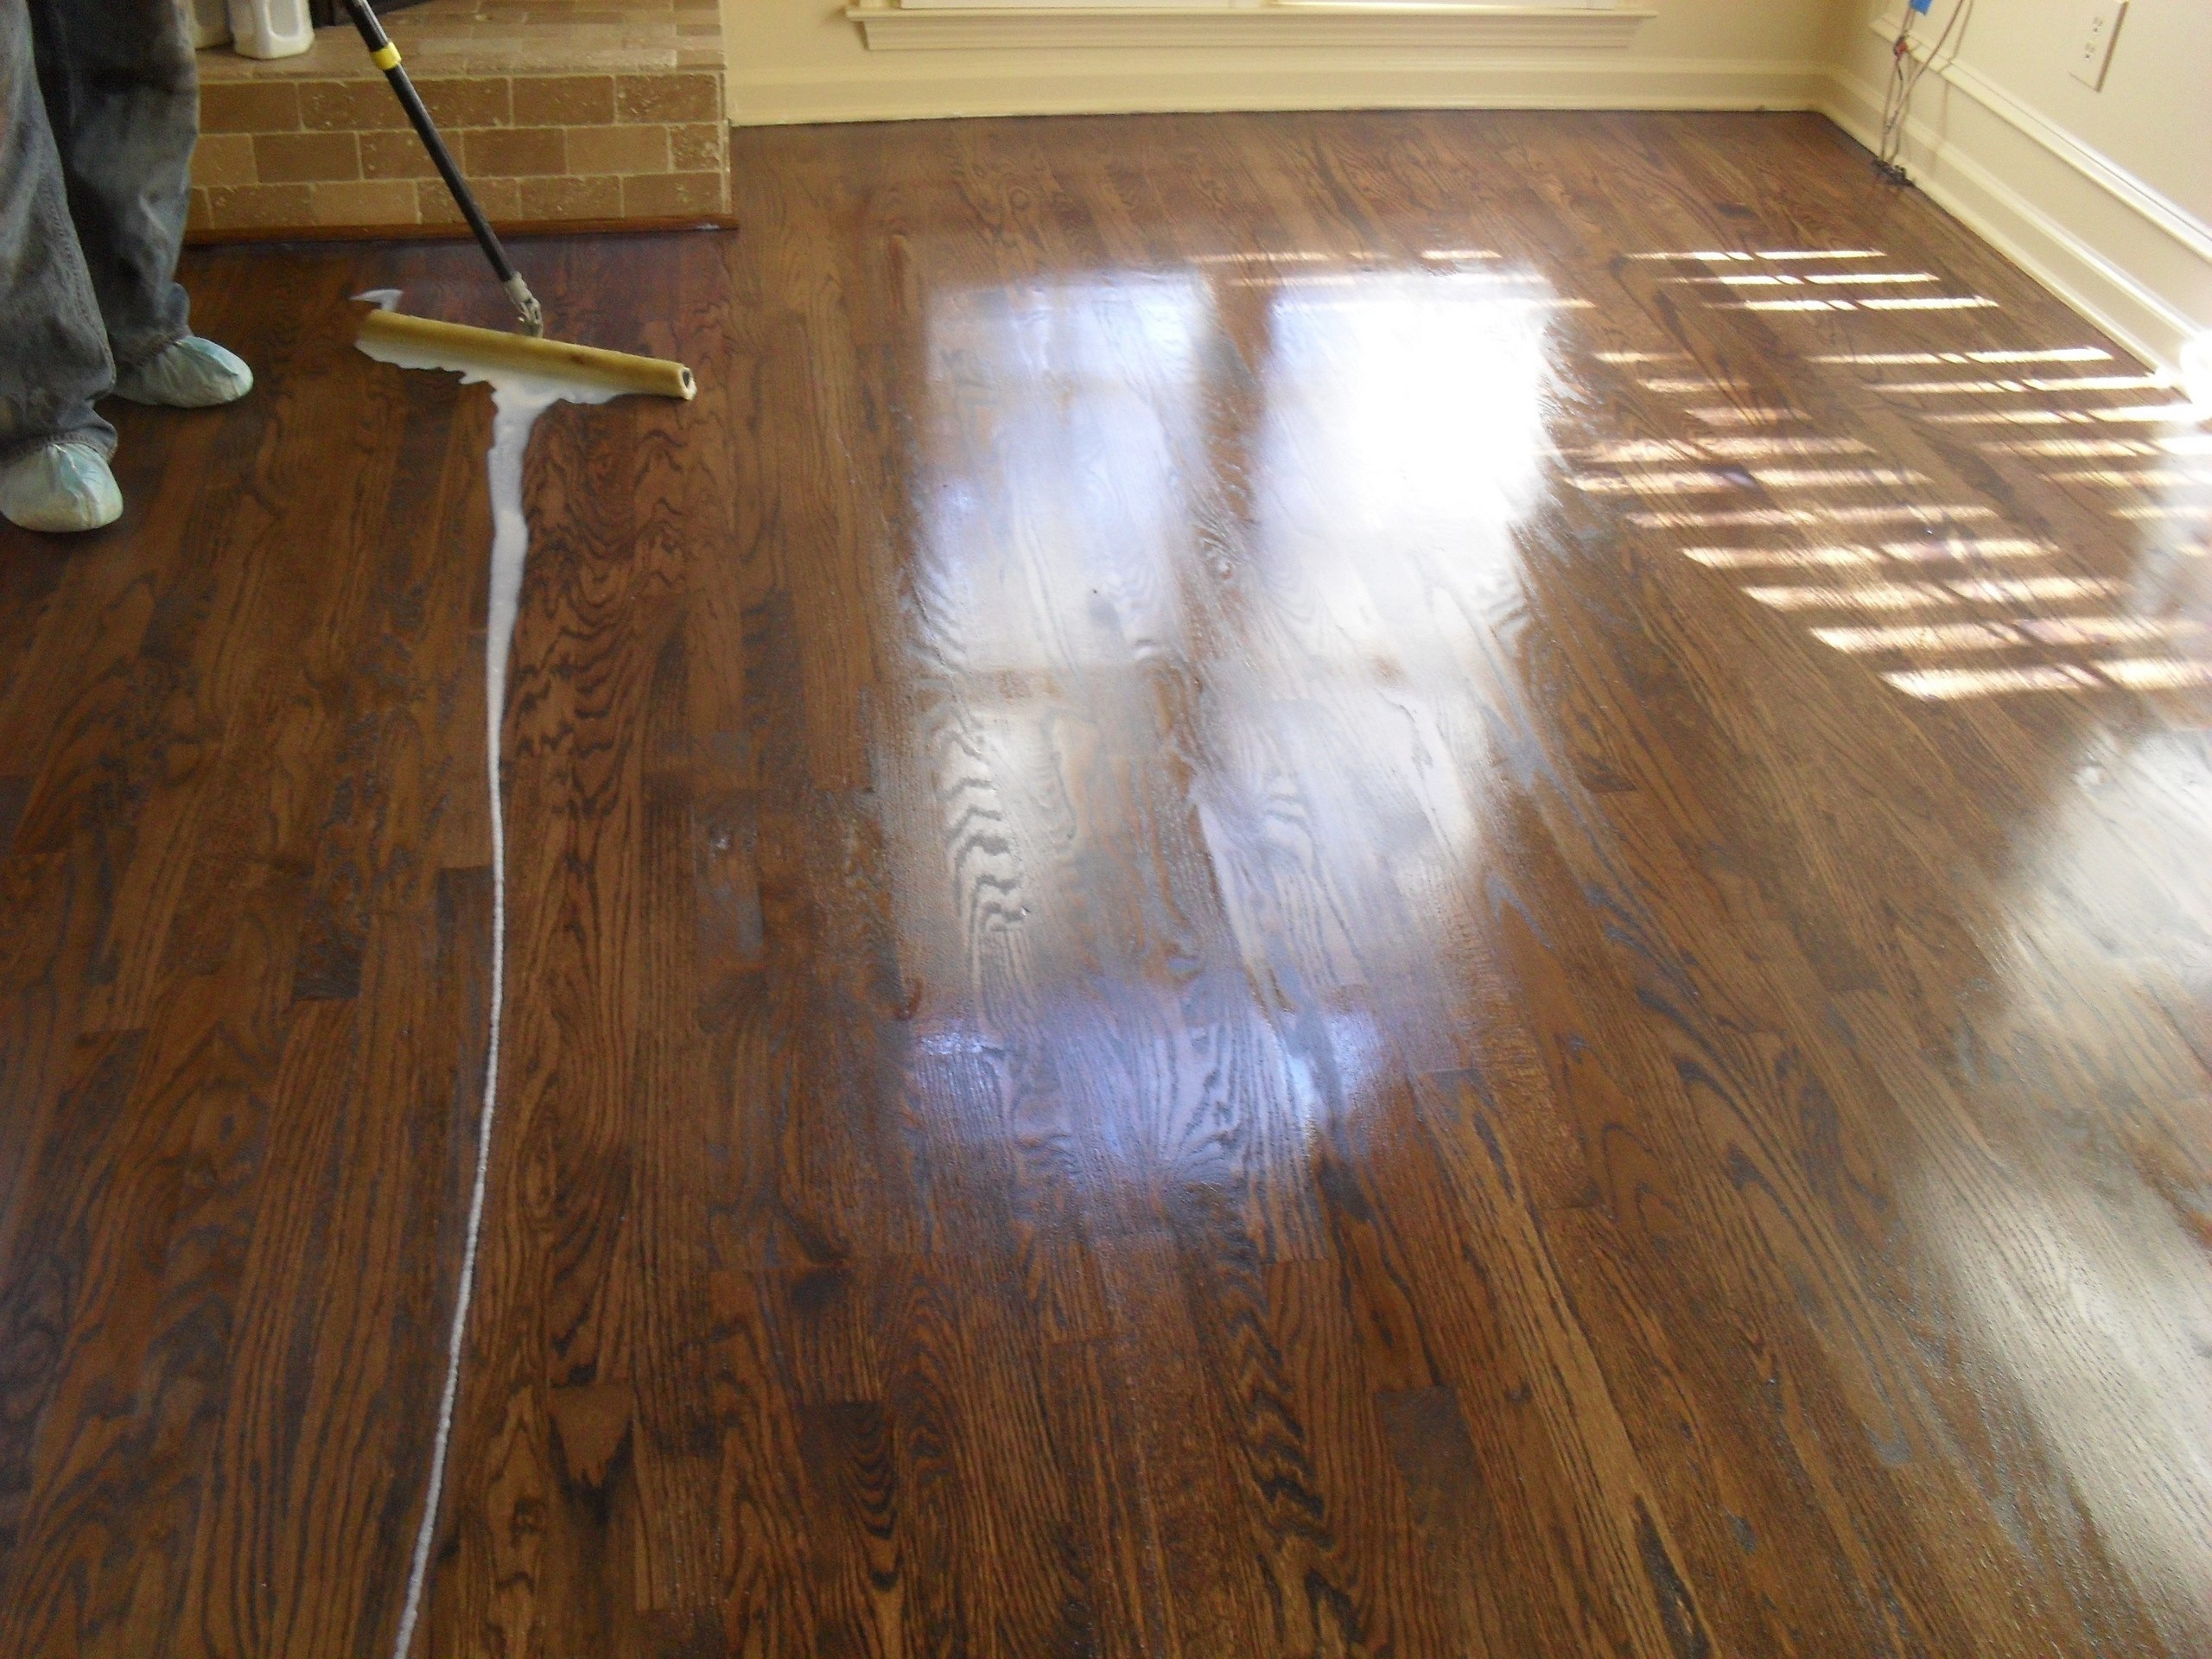 25 Nice How Much Does Restaining Hardwood Floors Cost 2022 free download how much does restaining hardwood floors cost of refinish hardwood floors diy restain wood floor awesome how to regarding refinish hardwood floors diy restain wood floor awesome how to refin